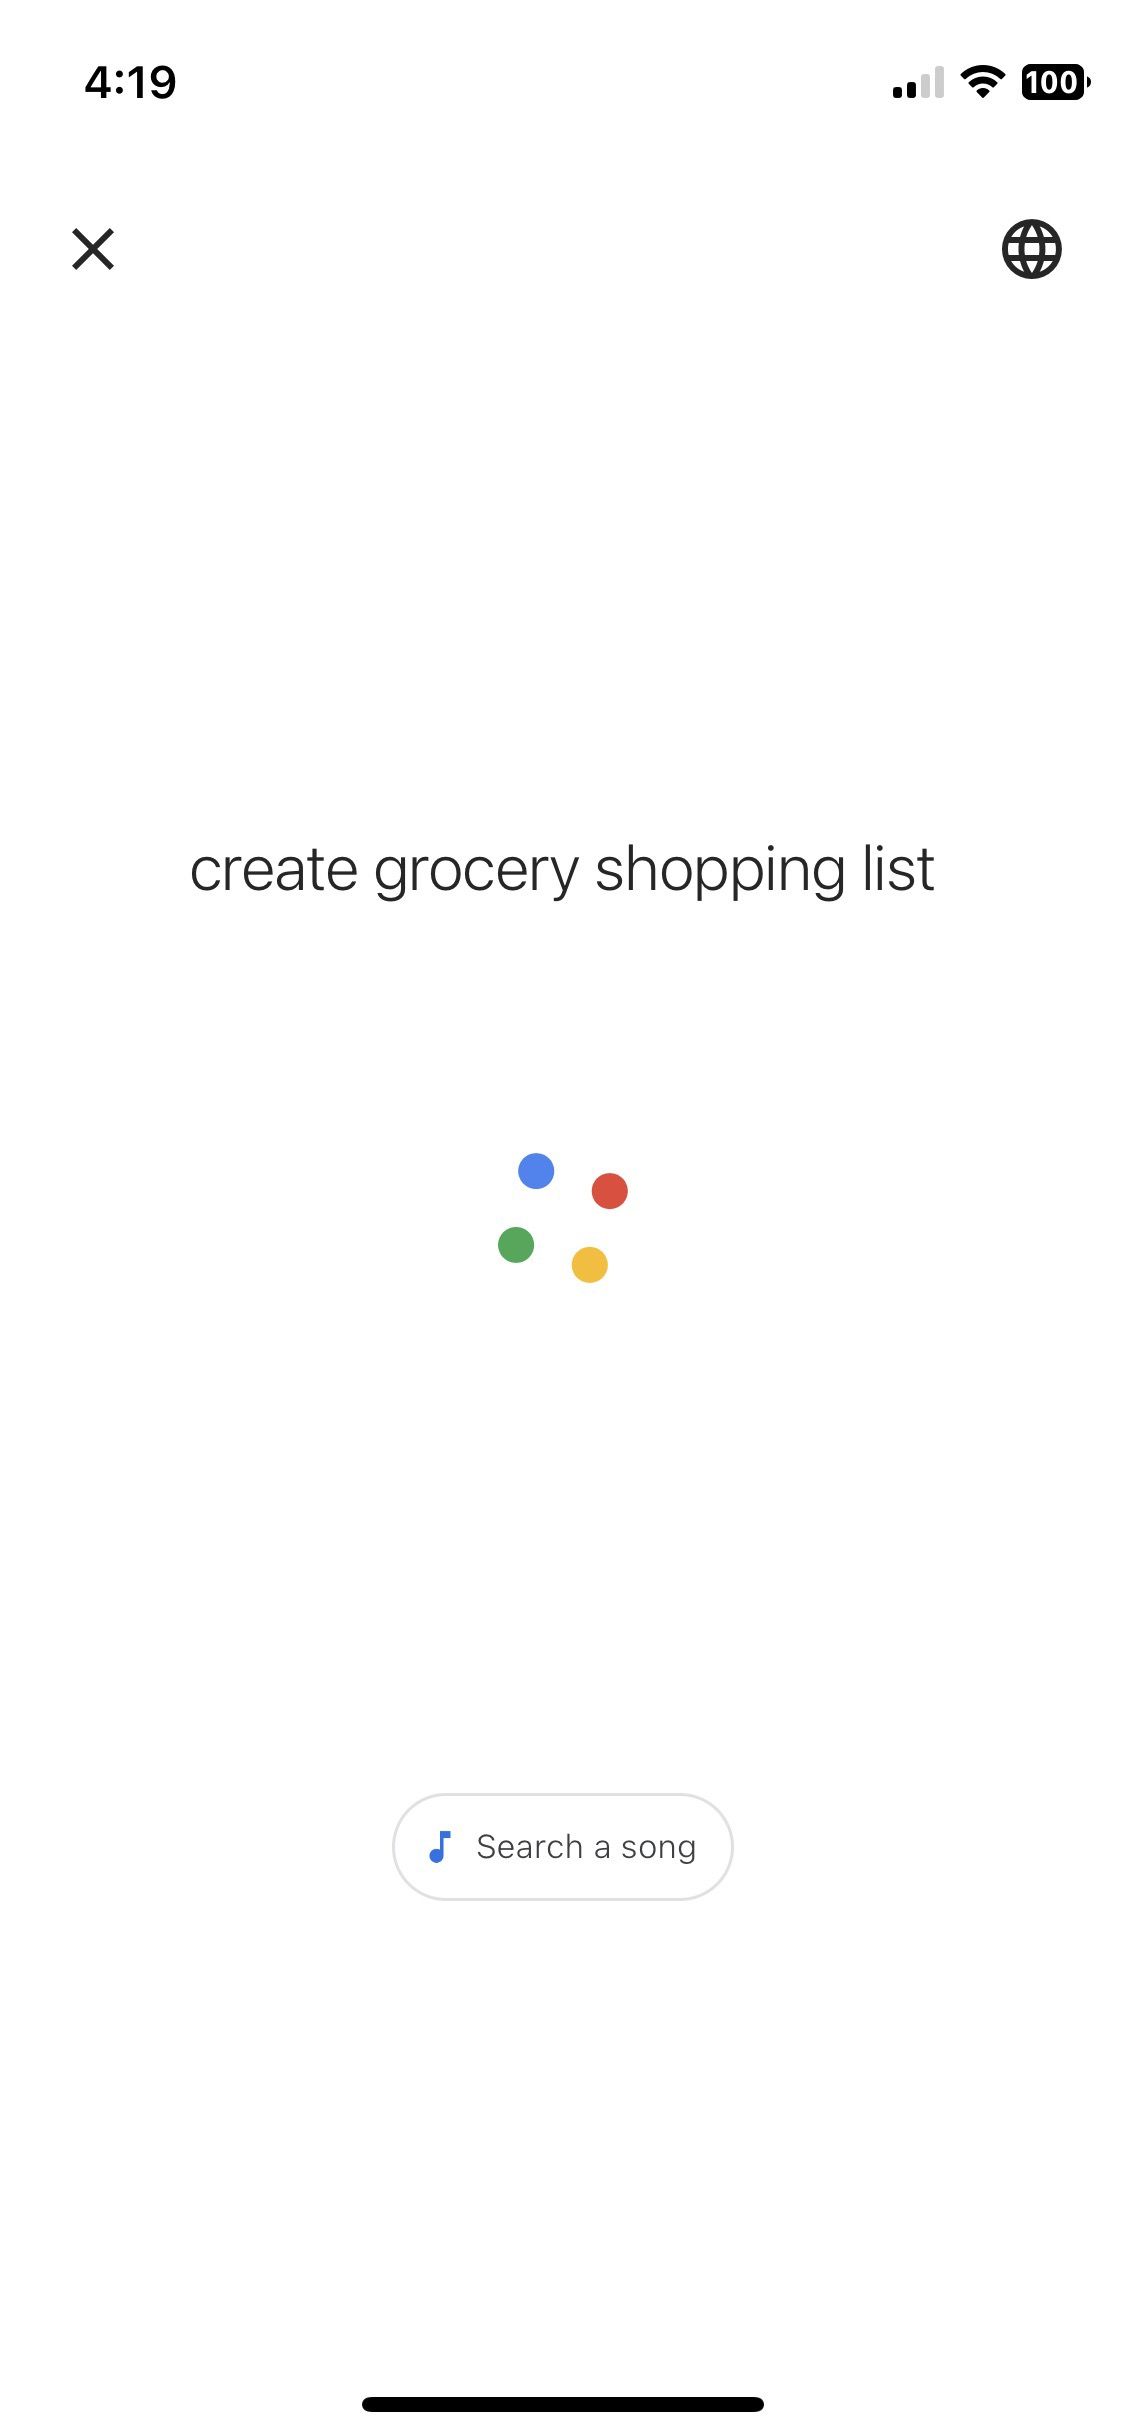 Here's How to Make an Organized Shopping List According to Experts